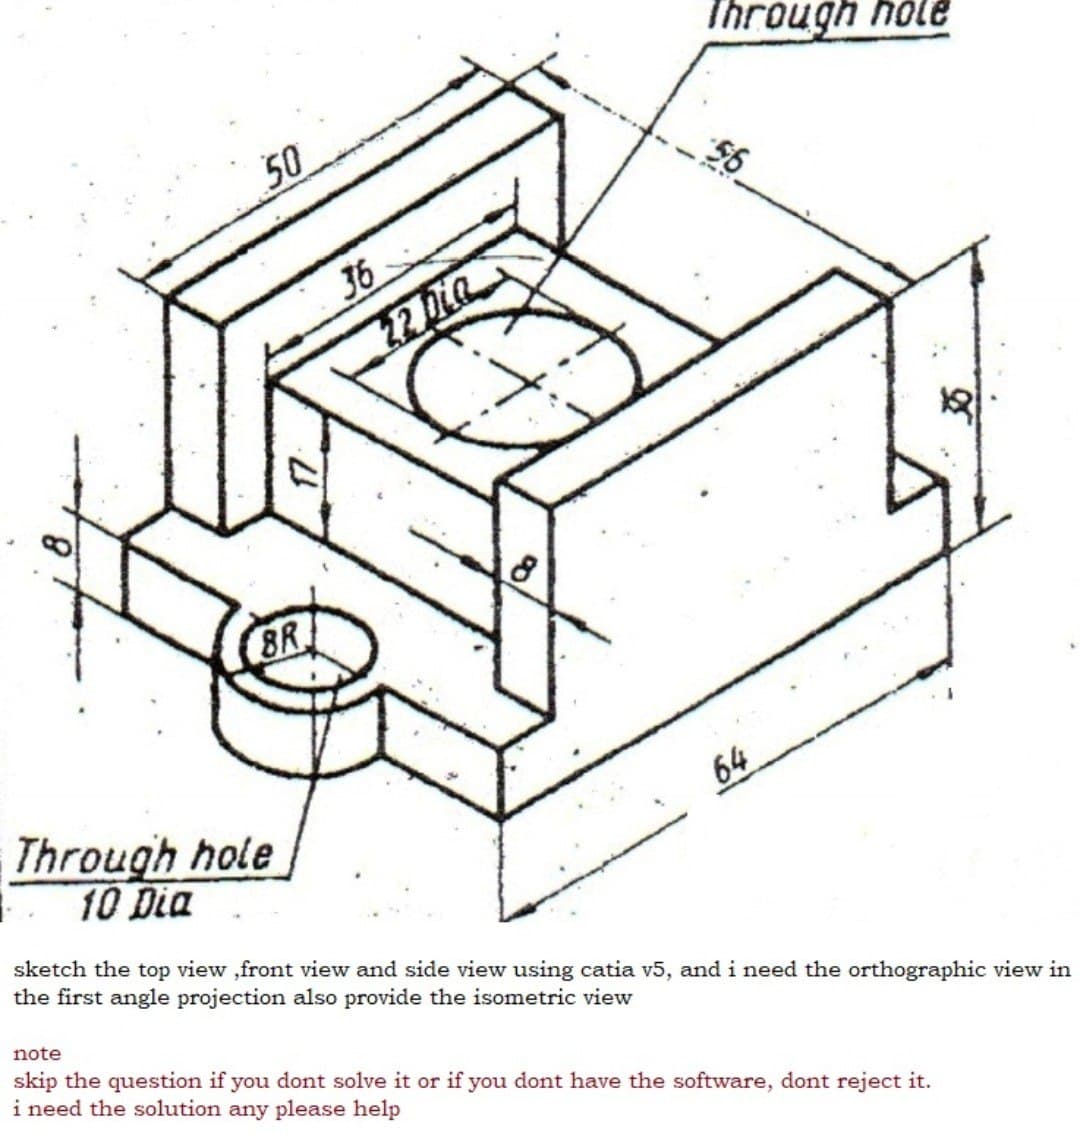 Through hole
50
36
32 Dia
8R
Through hole
10 Dia
64
sketch the top view ,front view and side view using catia v5, and i need the orthographic view in
the first angle projection also provide the isometric view
note
skip the question if you dont solve it or if you dont have the software, dont reject it.
i need the solution any please help
